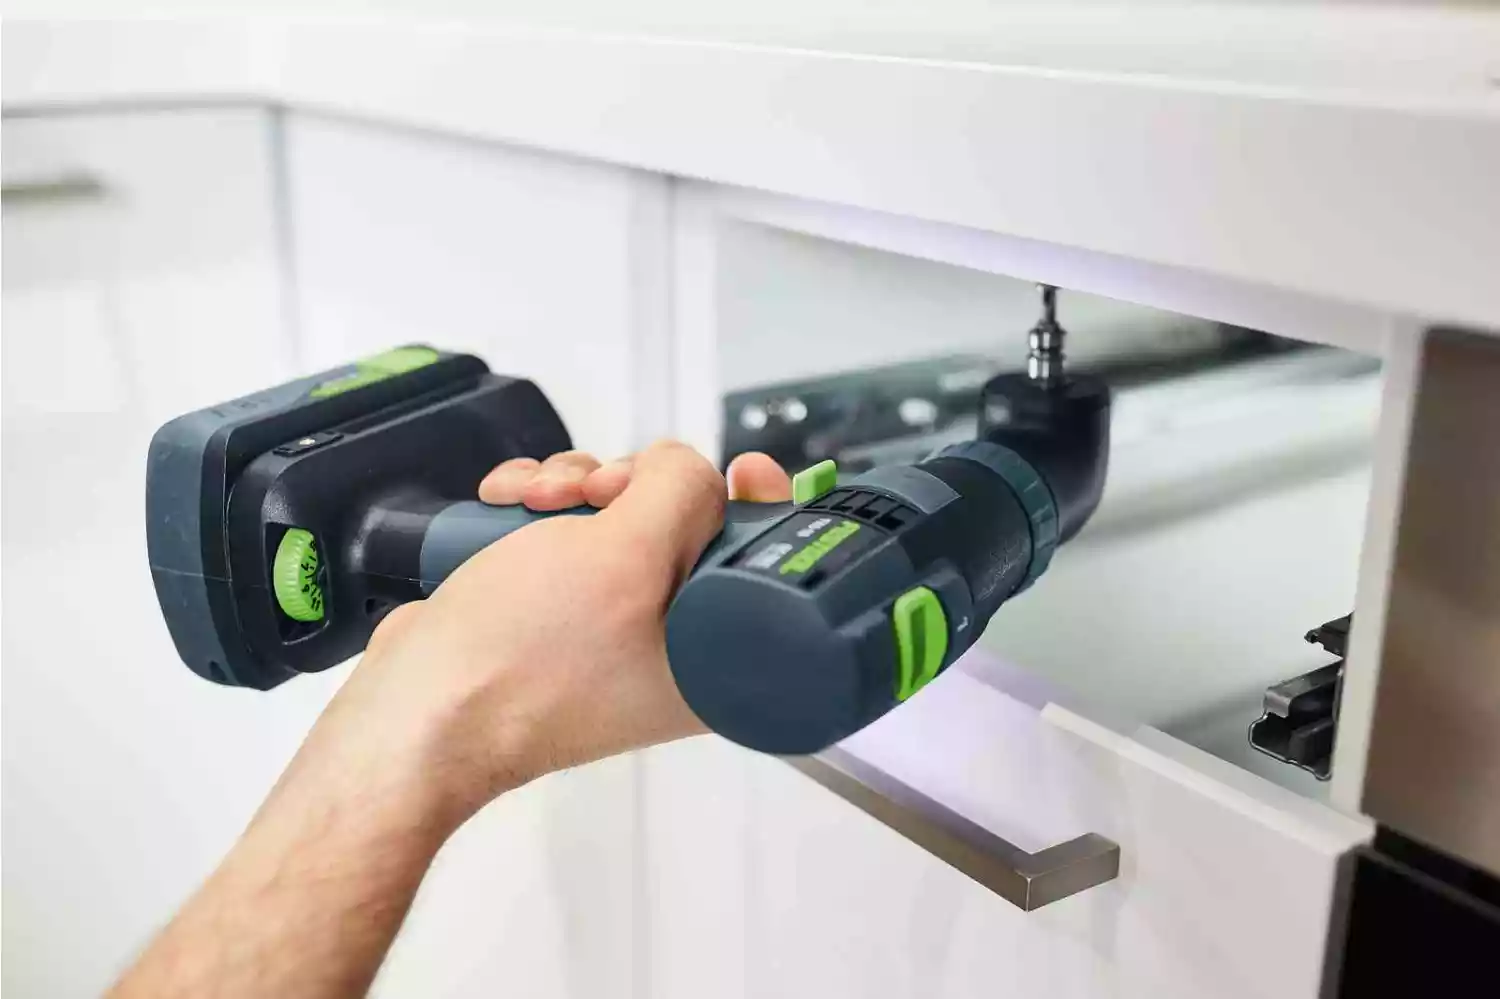 Festool TXS 18-Basic-Set 18V Li-Ion accu schroefboormachine body incl. bitset in systainer - 40Nm-image